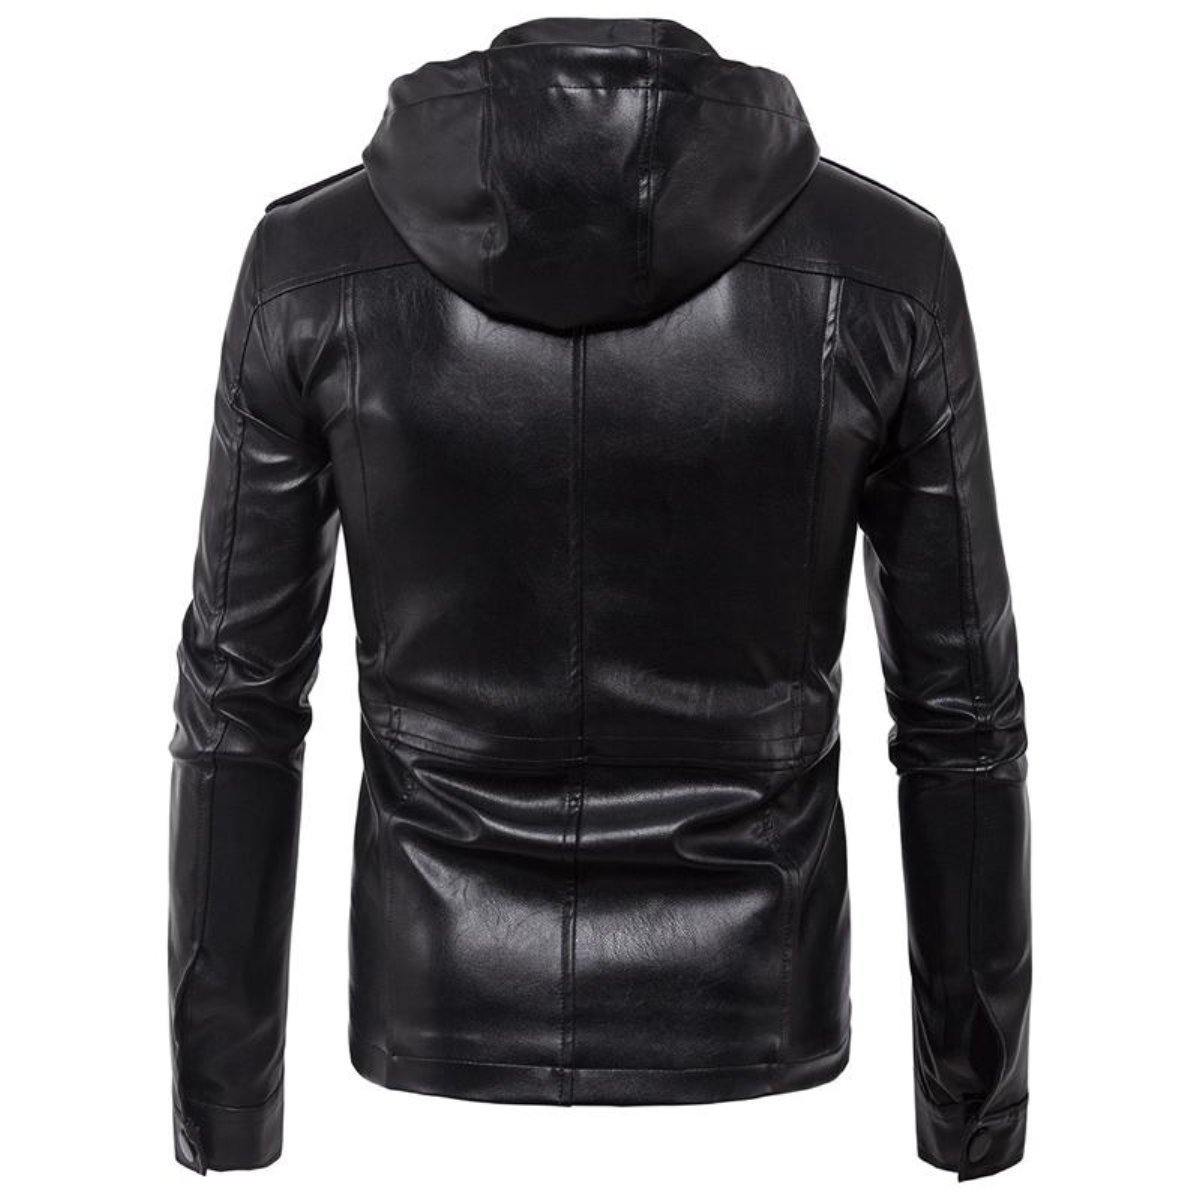 Hooded Leather Jacket - American Legend Rider